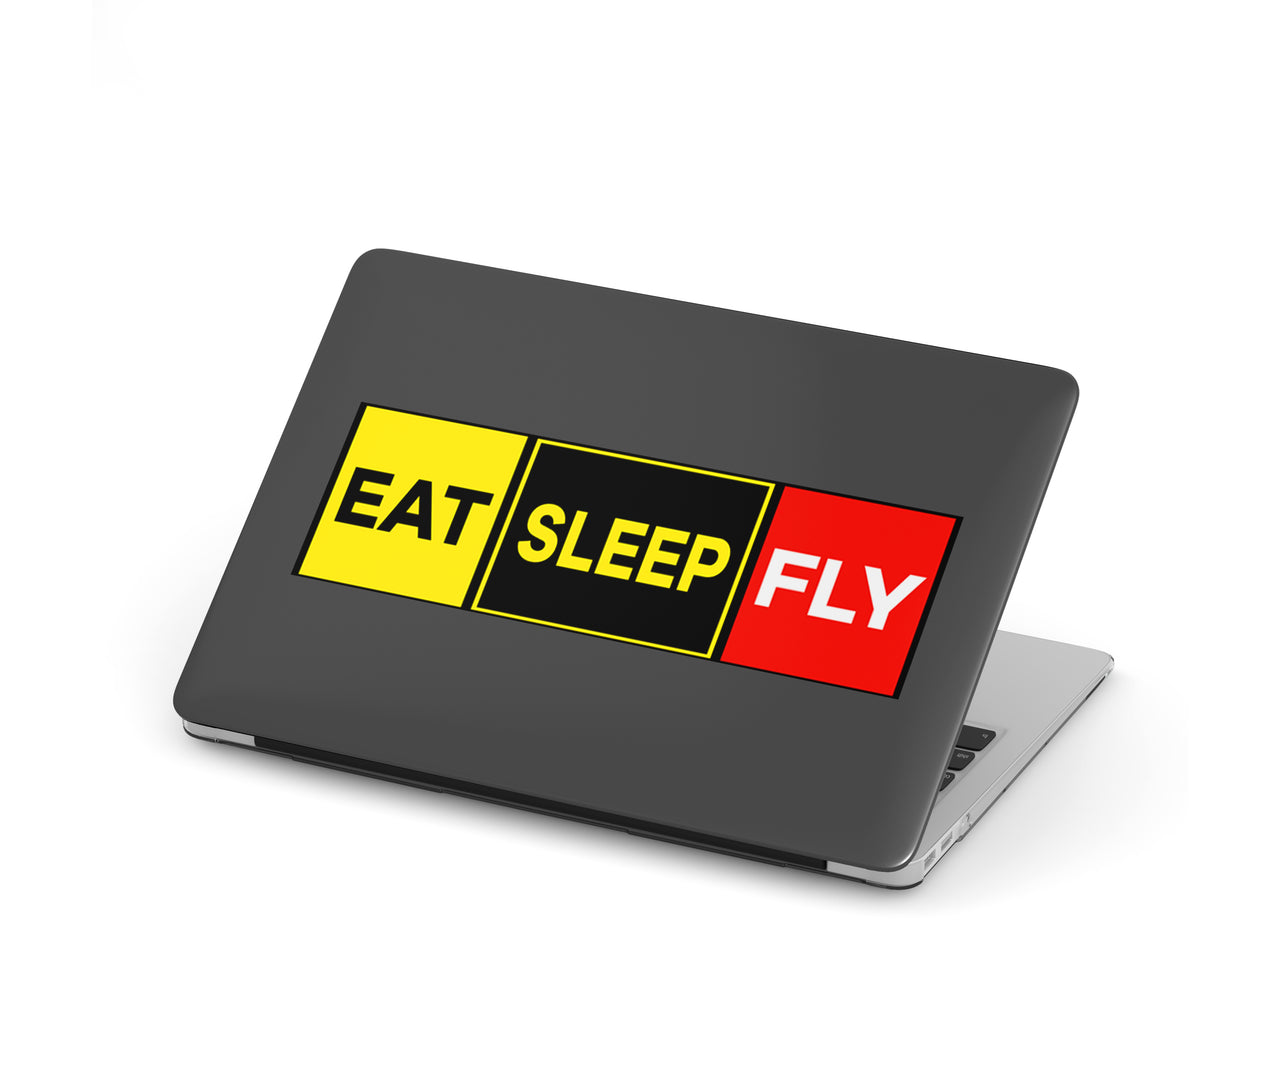 Eat Sleep Fly (Colourful) Designed Macbook Cases